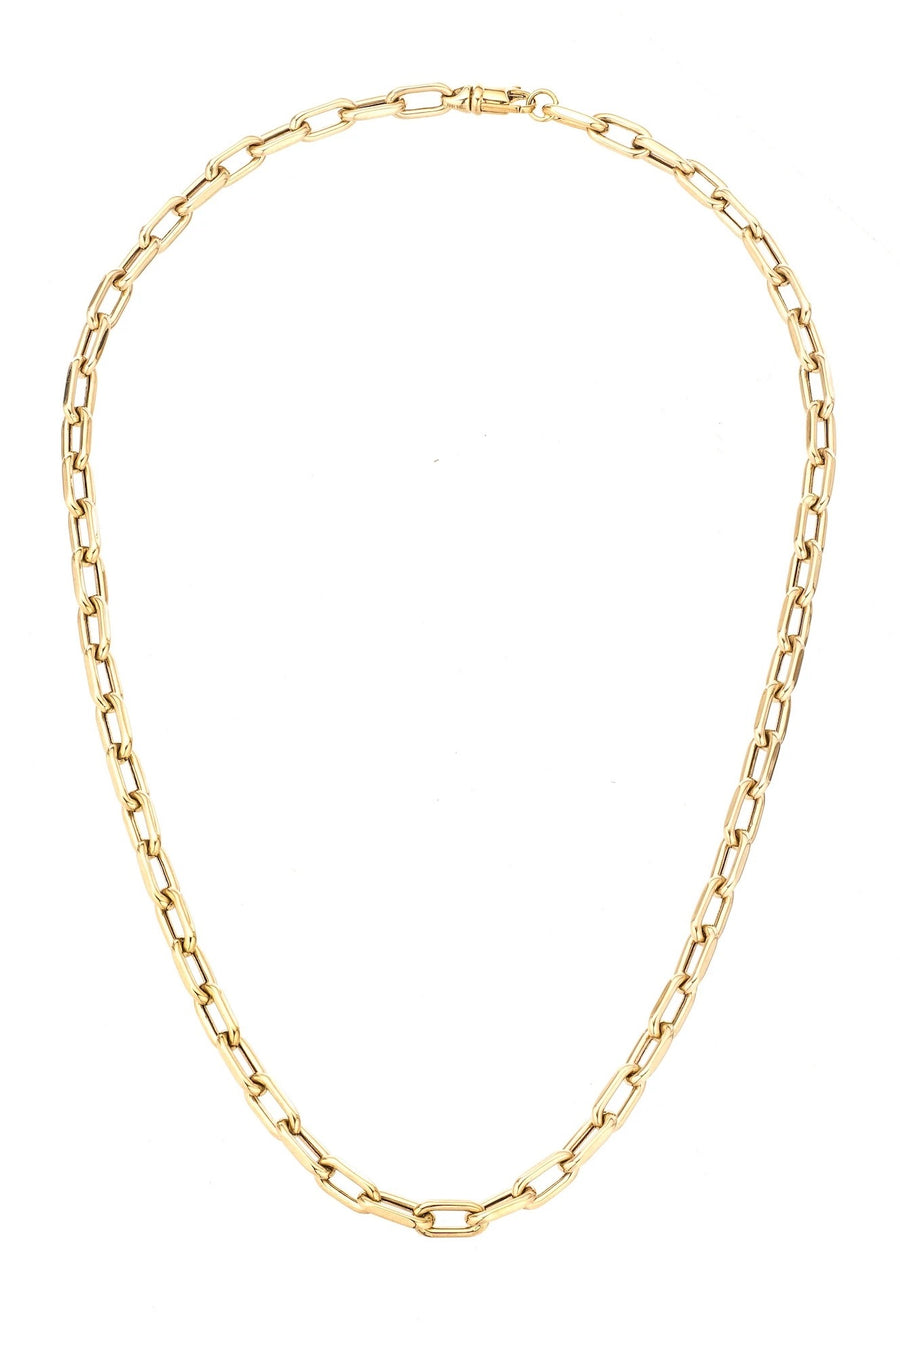 18" 5.3mm wide Italian Chain Link Necklace - 14K Yellow Gold